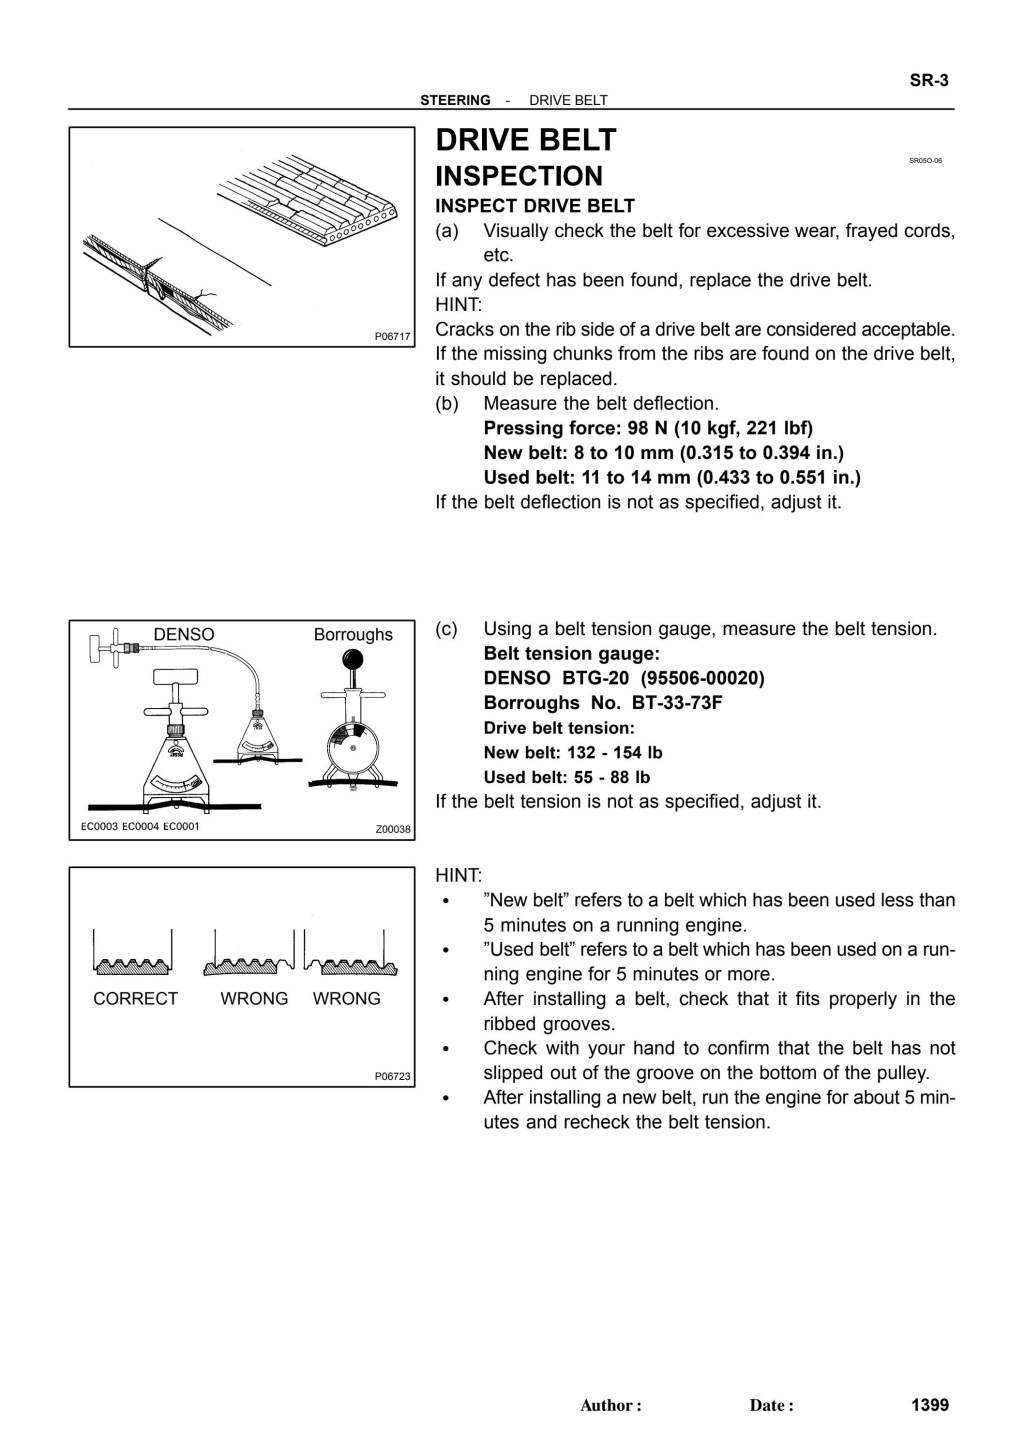 Picture of: Toyota Sienna Service Repair Manual by kmidisodkbmv – Issuu